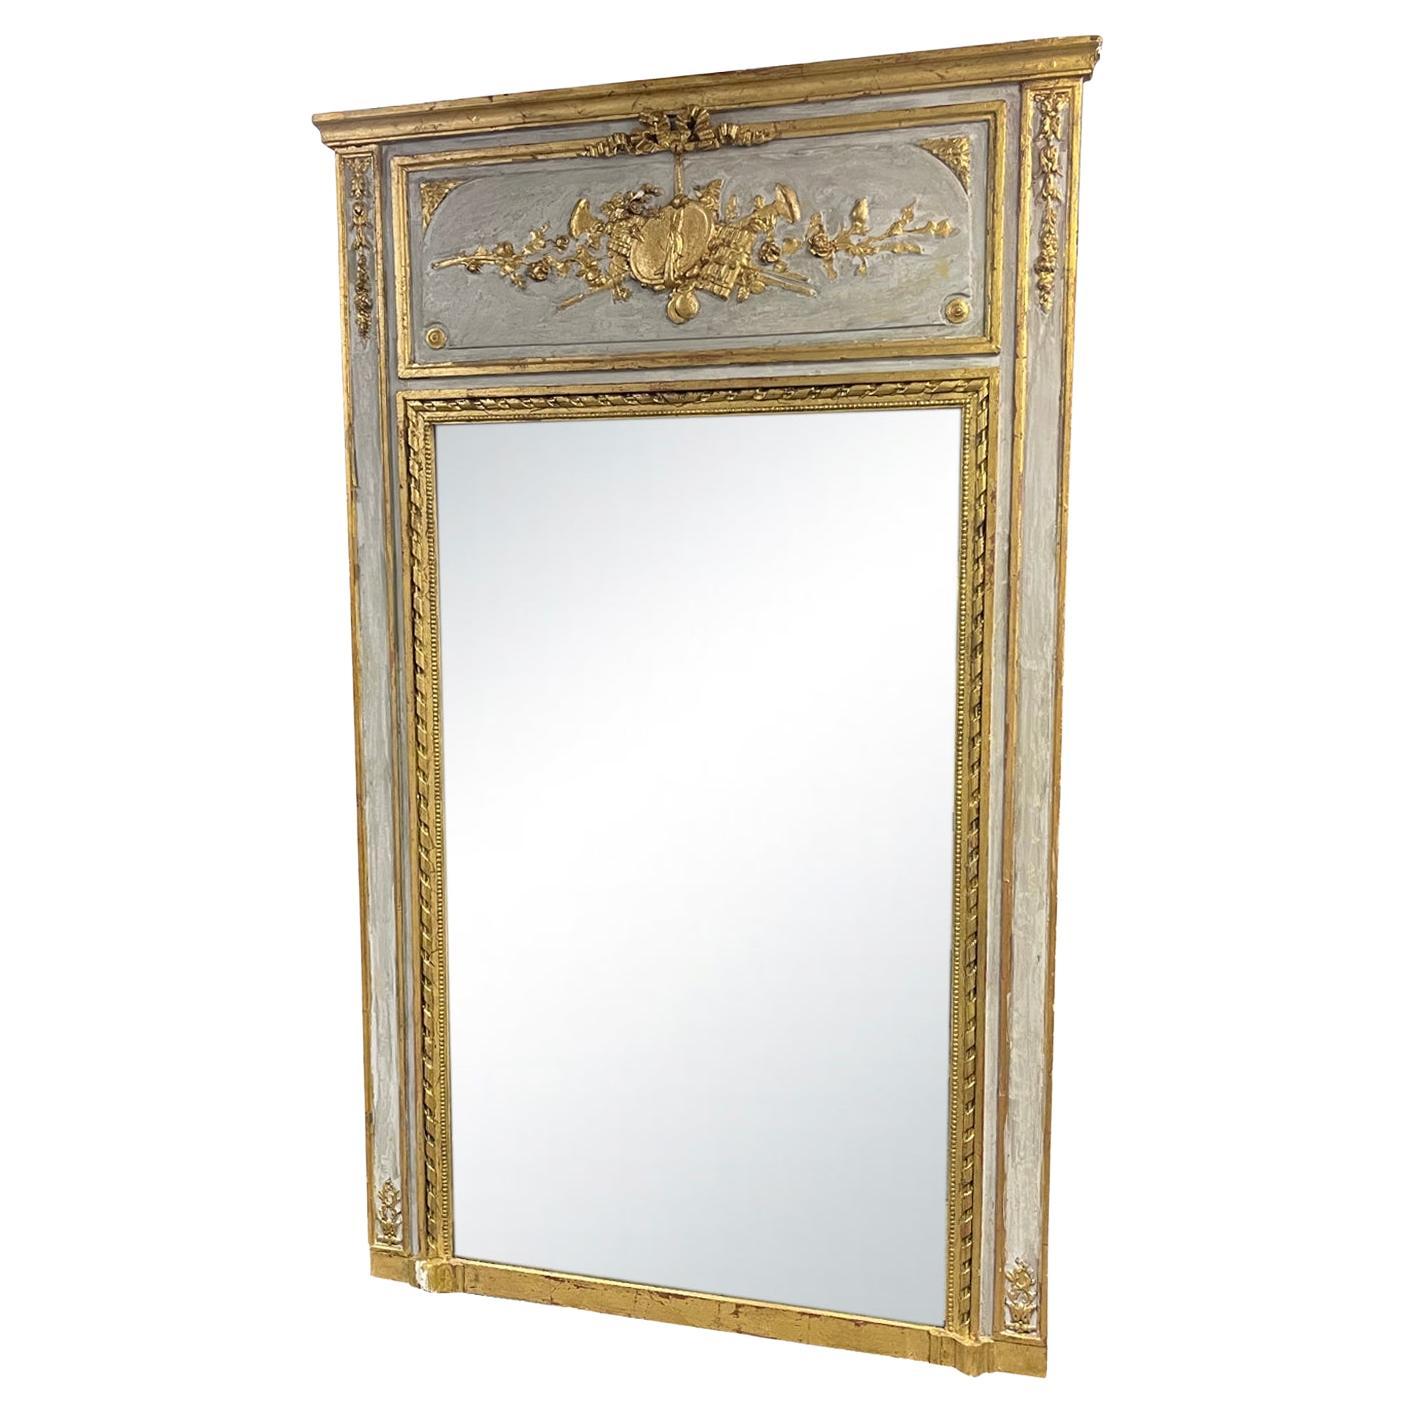 19th Century French Louis XVI Antique Gilded Wood Trumeau, Floor Glass Mirror